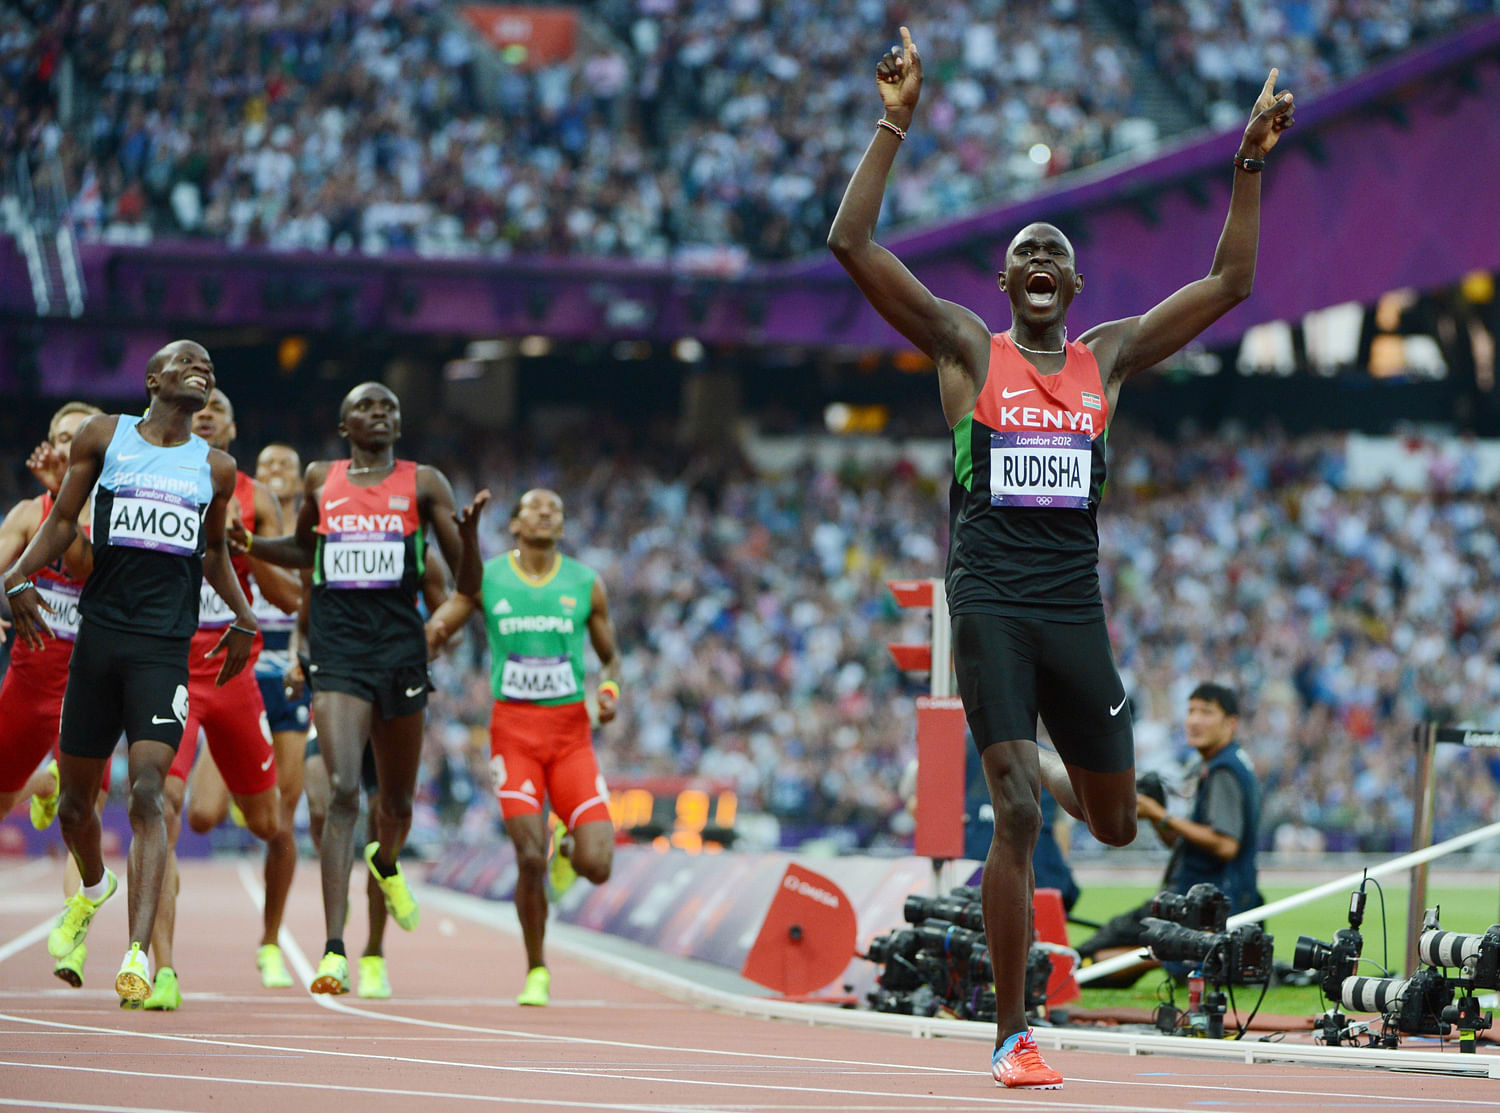 Kenya's gold medalist David Lekuta Rudisha wins the men's 800 final at the athletics event during the London 2012 Olympic Games on August 9, 2012 in London. Rudisha won the men's 800 metres Olympic title in a new world record of 1min 40.91sec. AFP 